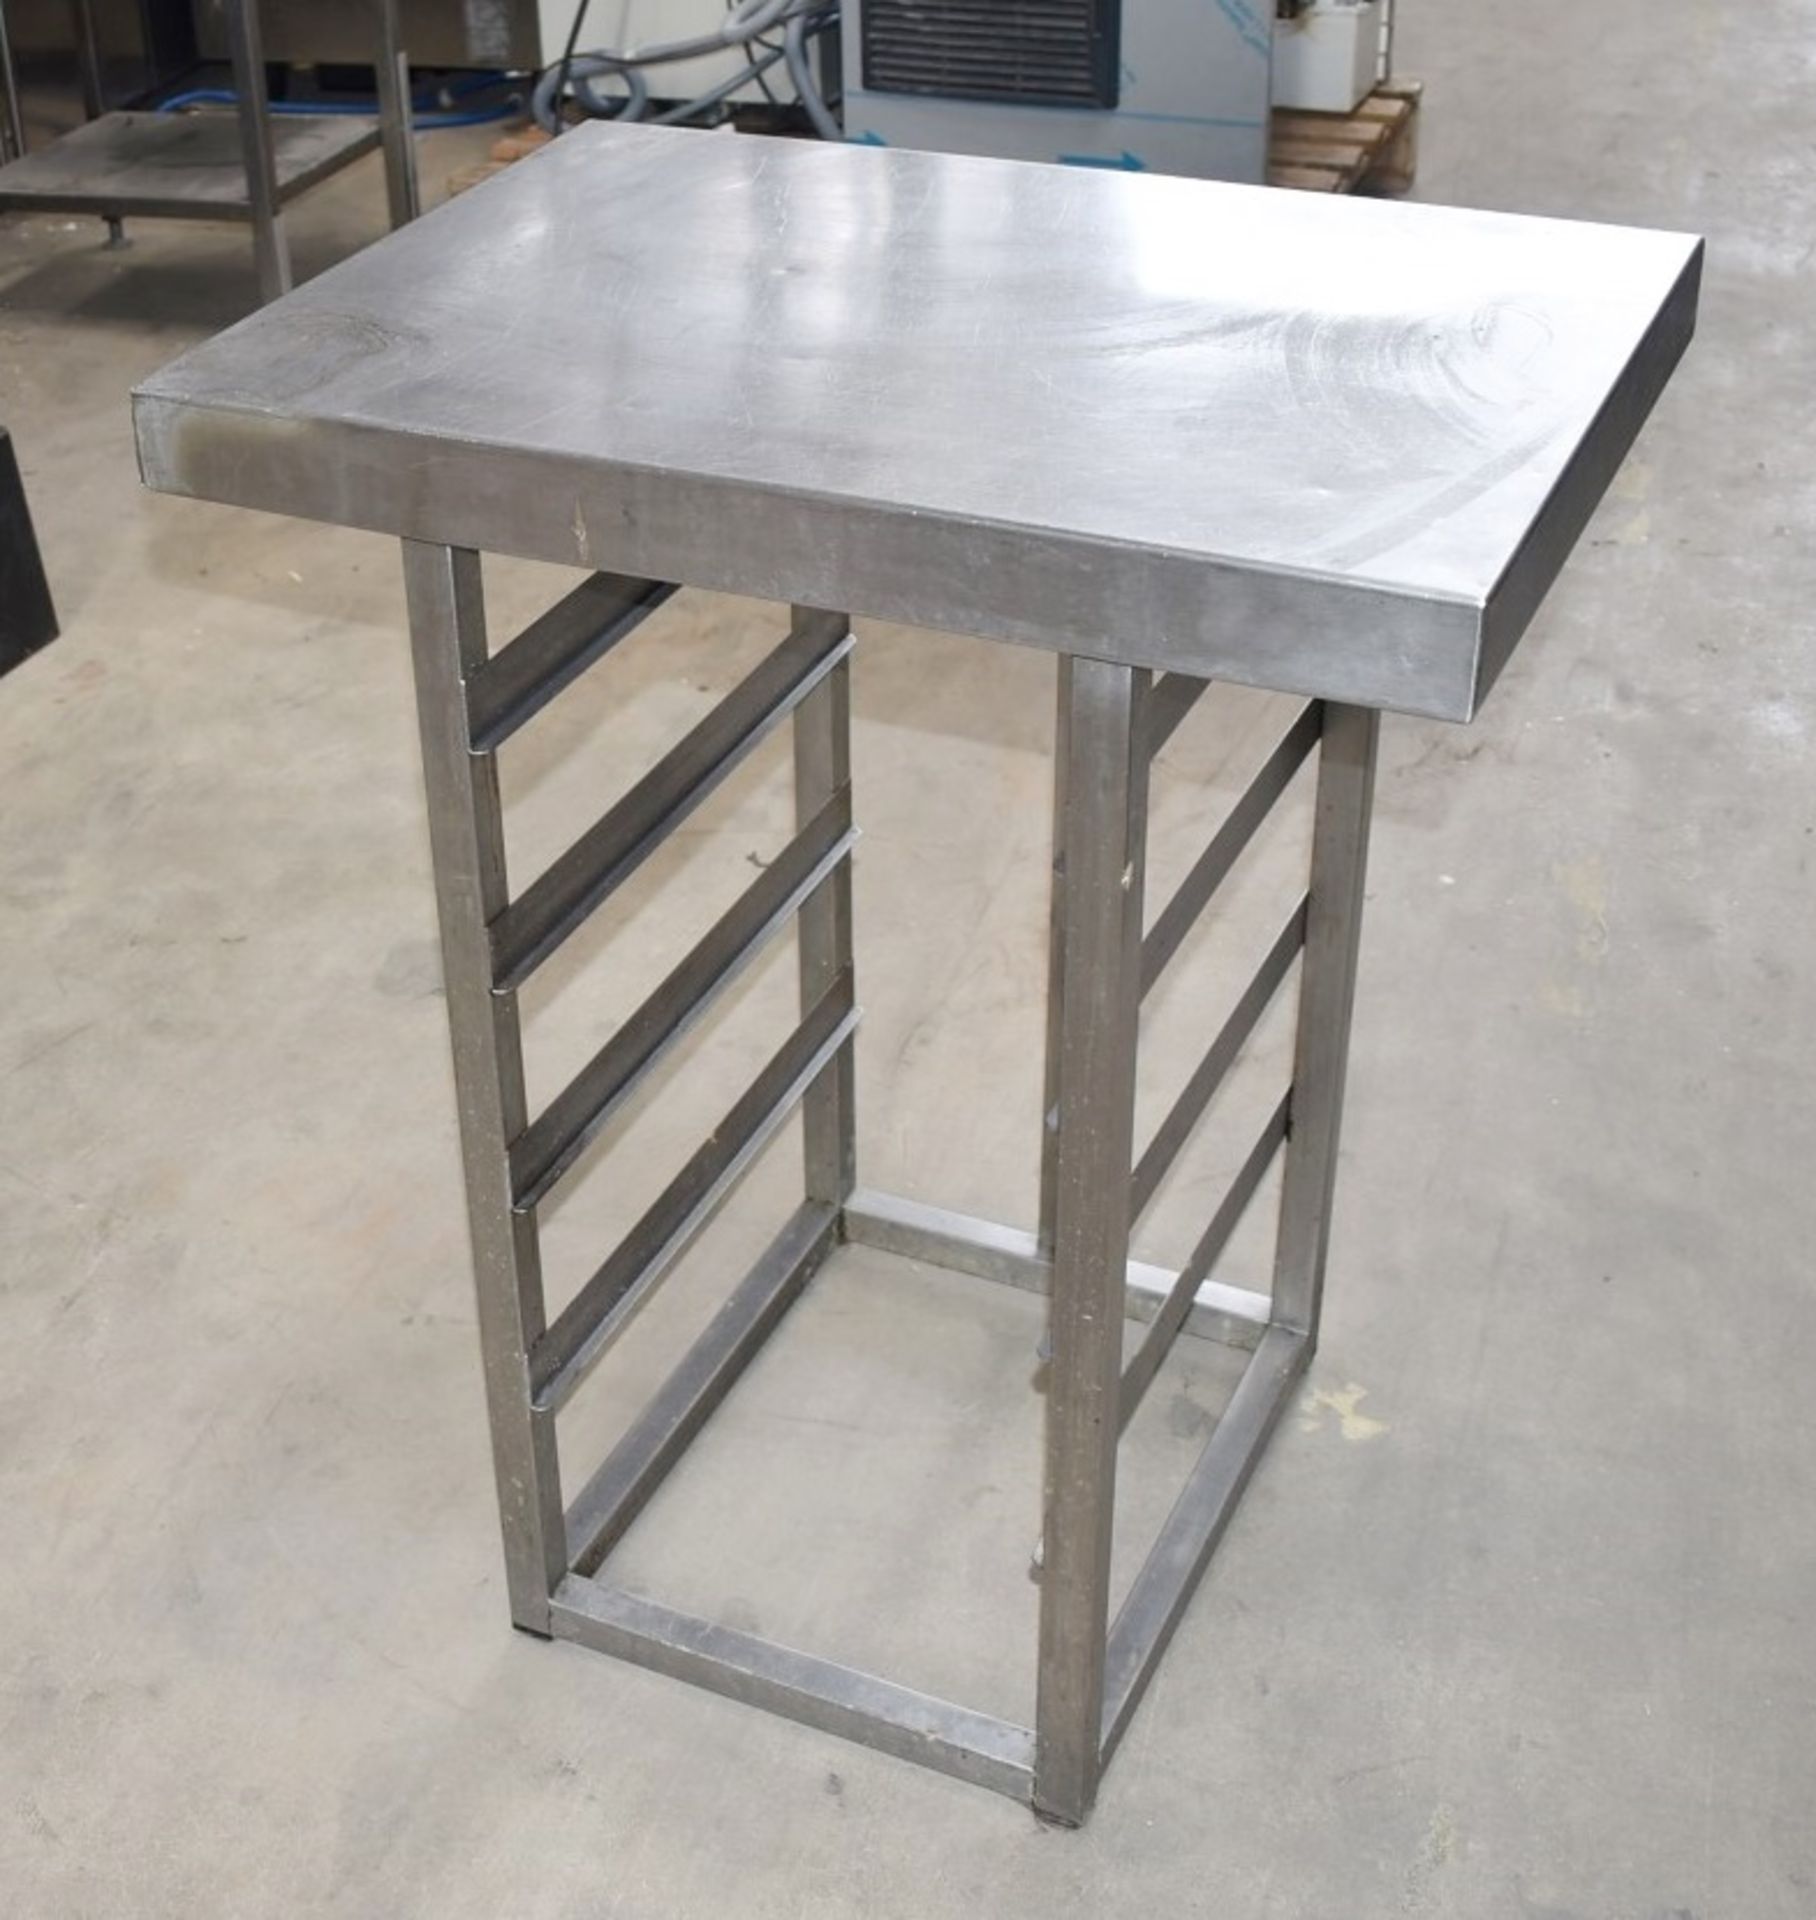 1 x Stainless Steel Prep Table With Tray Runners - Dimensions: H84 x W70 x D50 cms - Image 4 of 5